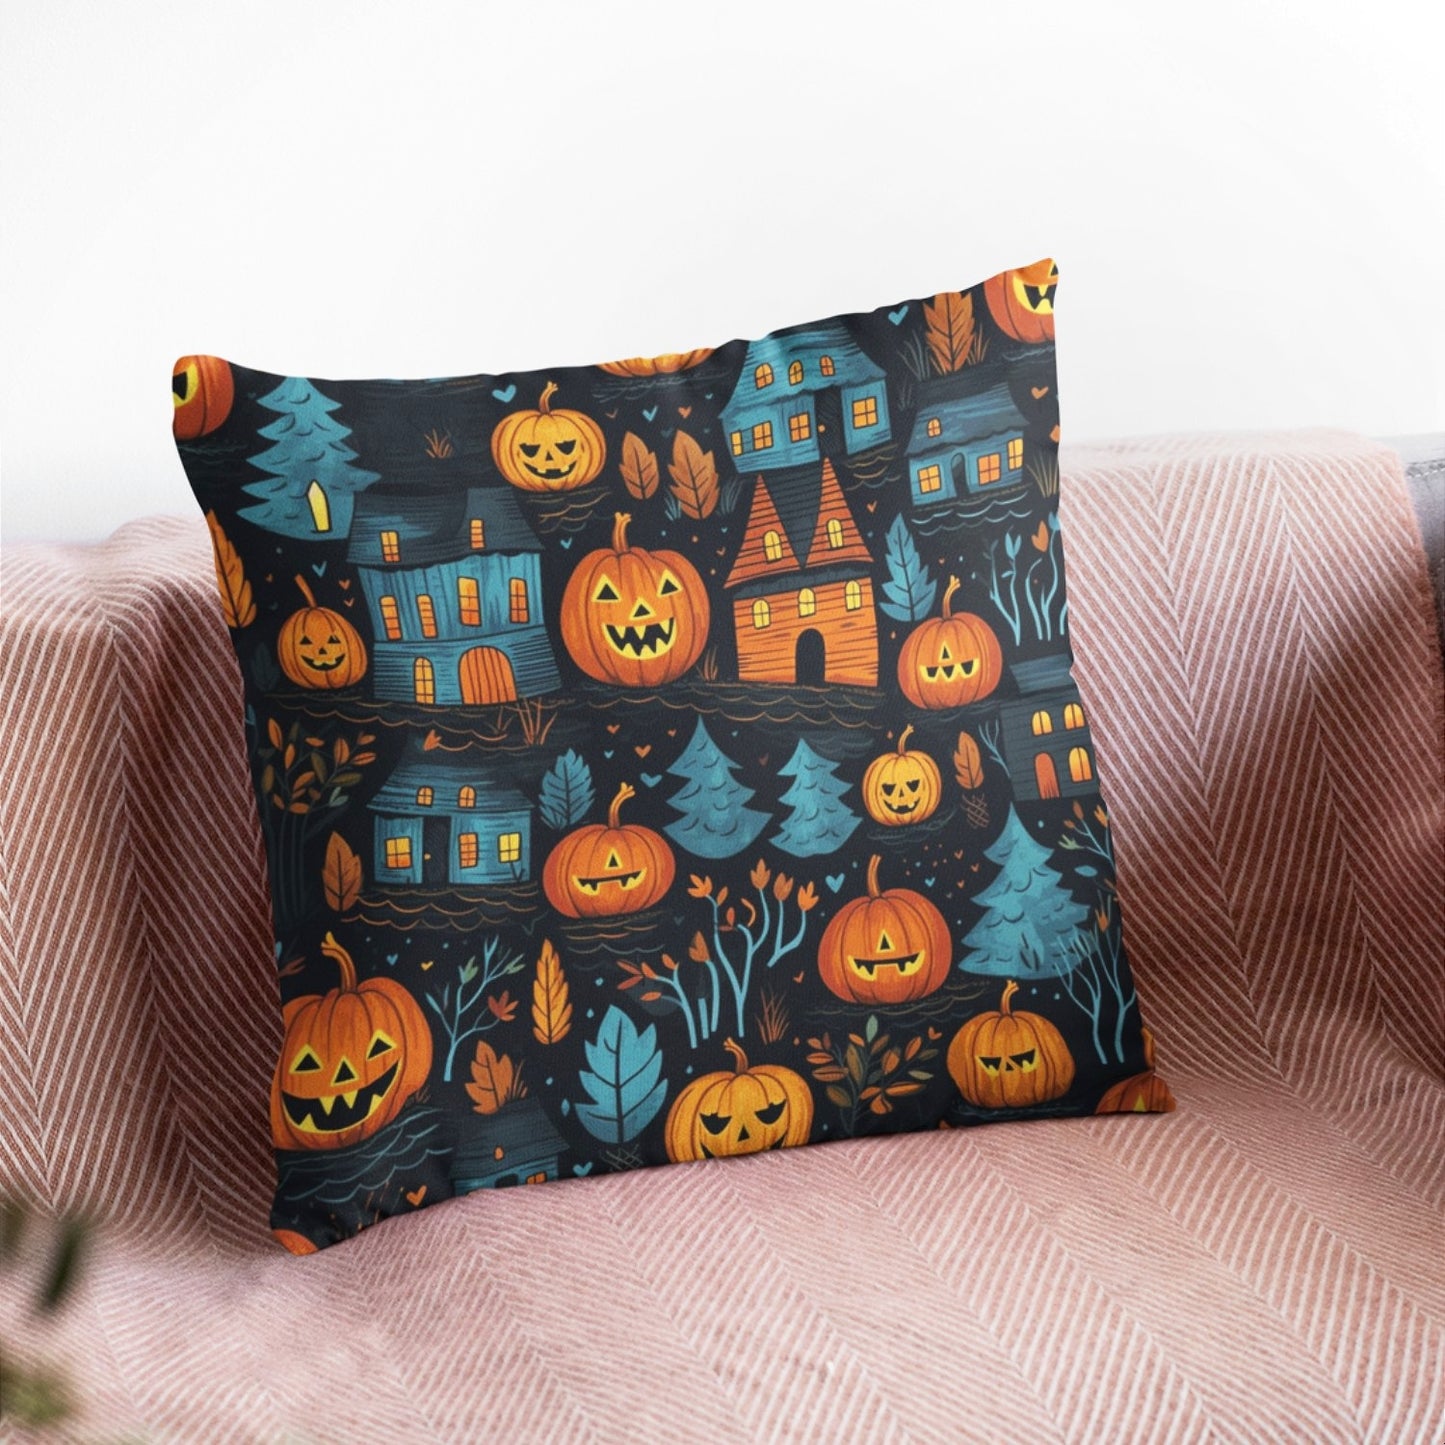 Halloween Throw Pillow, Fall Home Decor Decorative Cushion Cover by Homeezone